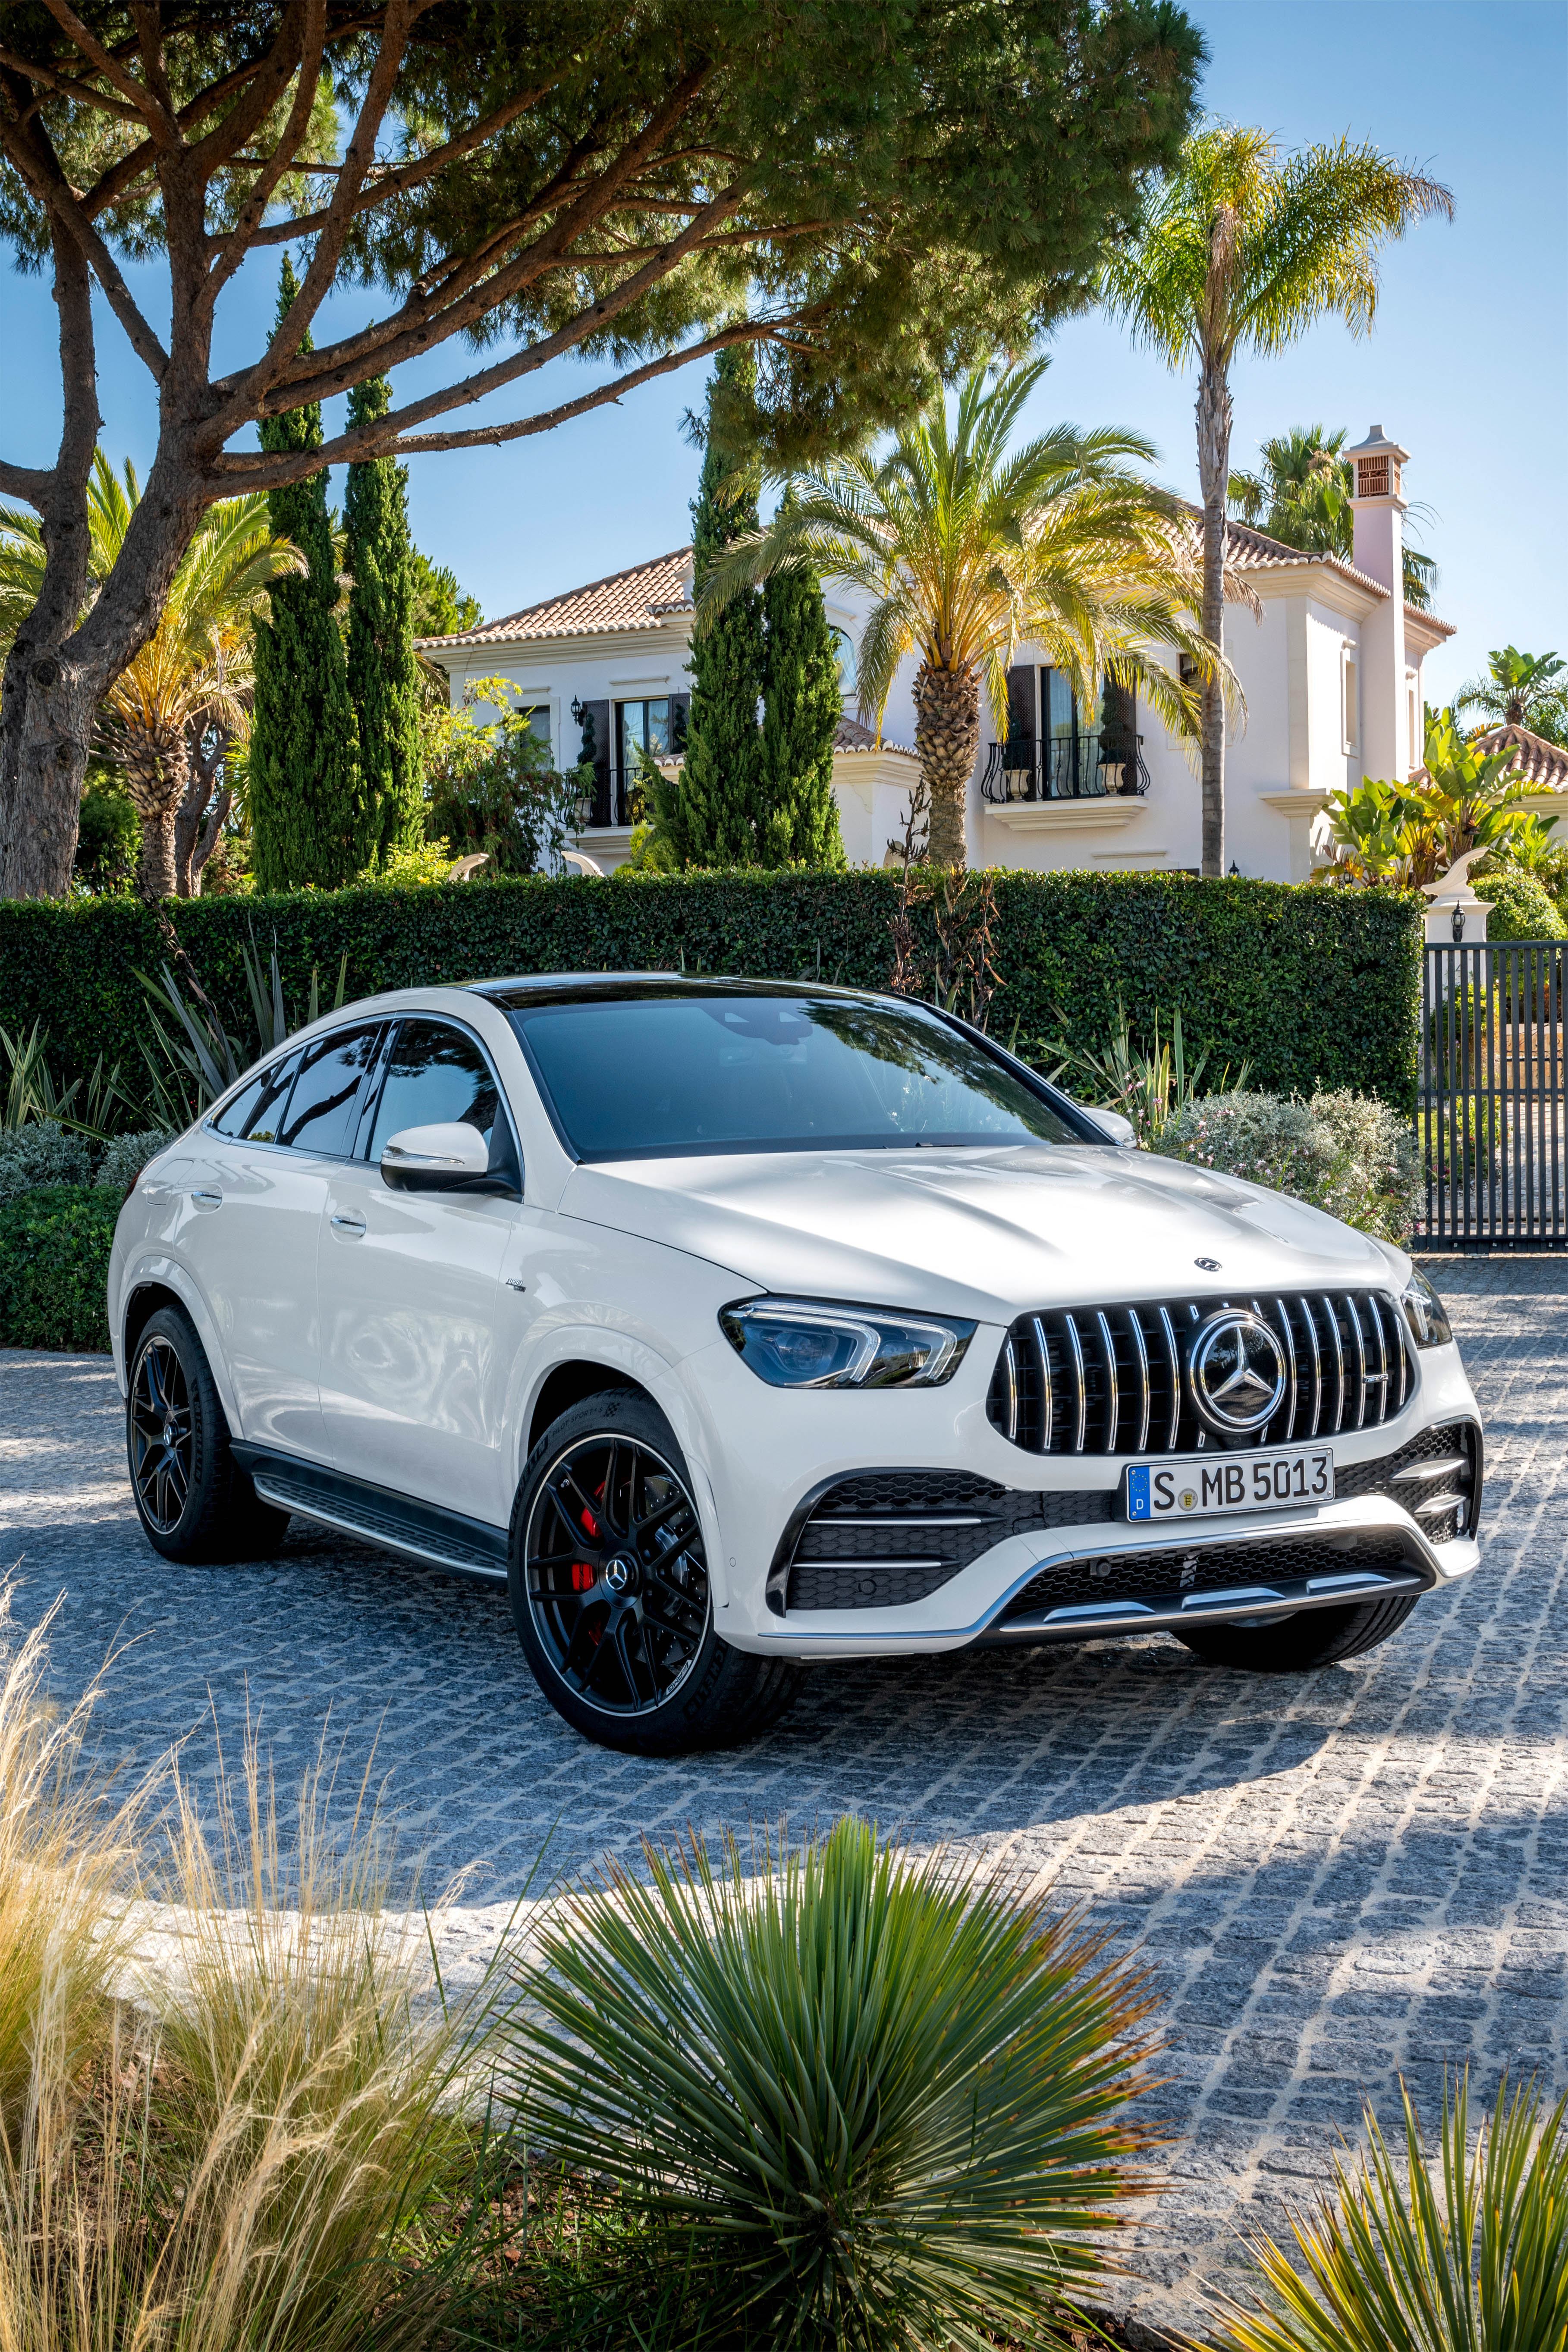 Mercedes GLE-Class Coupe (C167) modern specifications